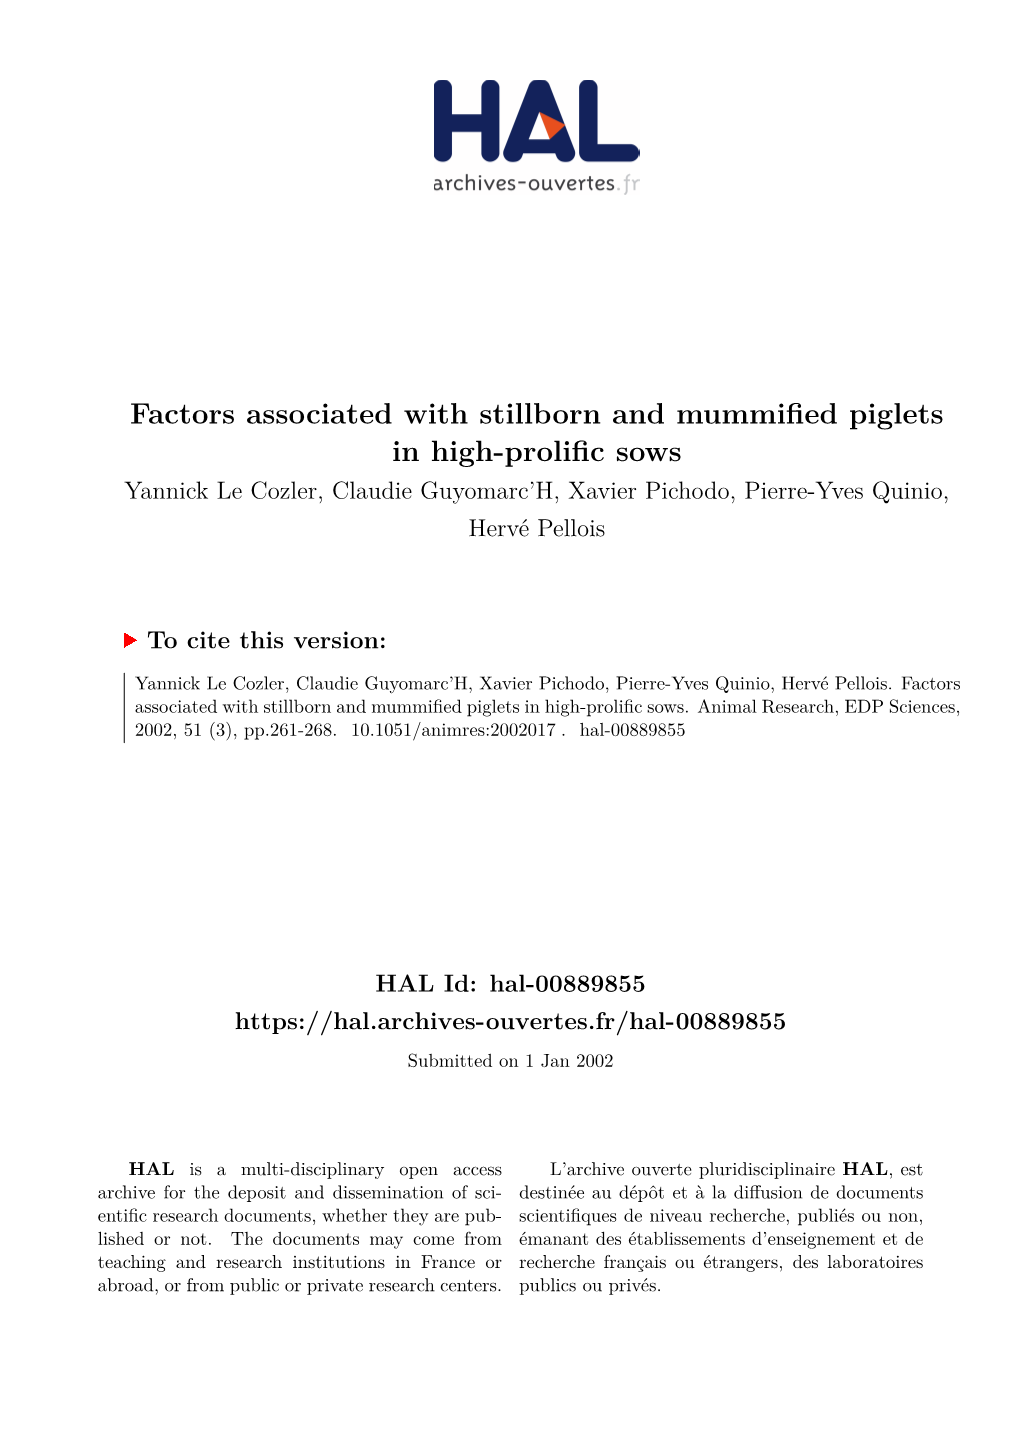 Factors Associated with Stillborn and Mummified Piglets in High-Prolific Sows Yannick Le Cozler, Claudie Guyomarc’H, Xavier Pichodo, Pierre-Yves Quinio, Hervé Pellois